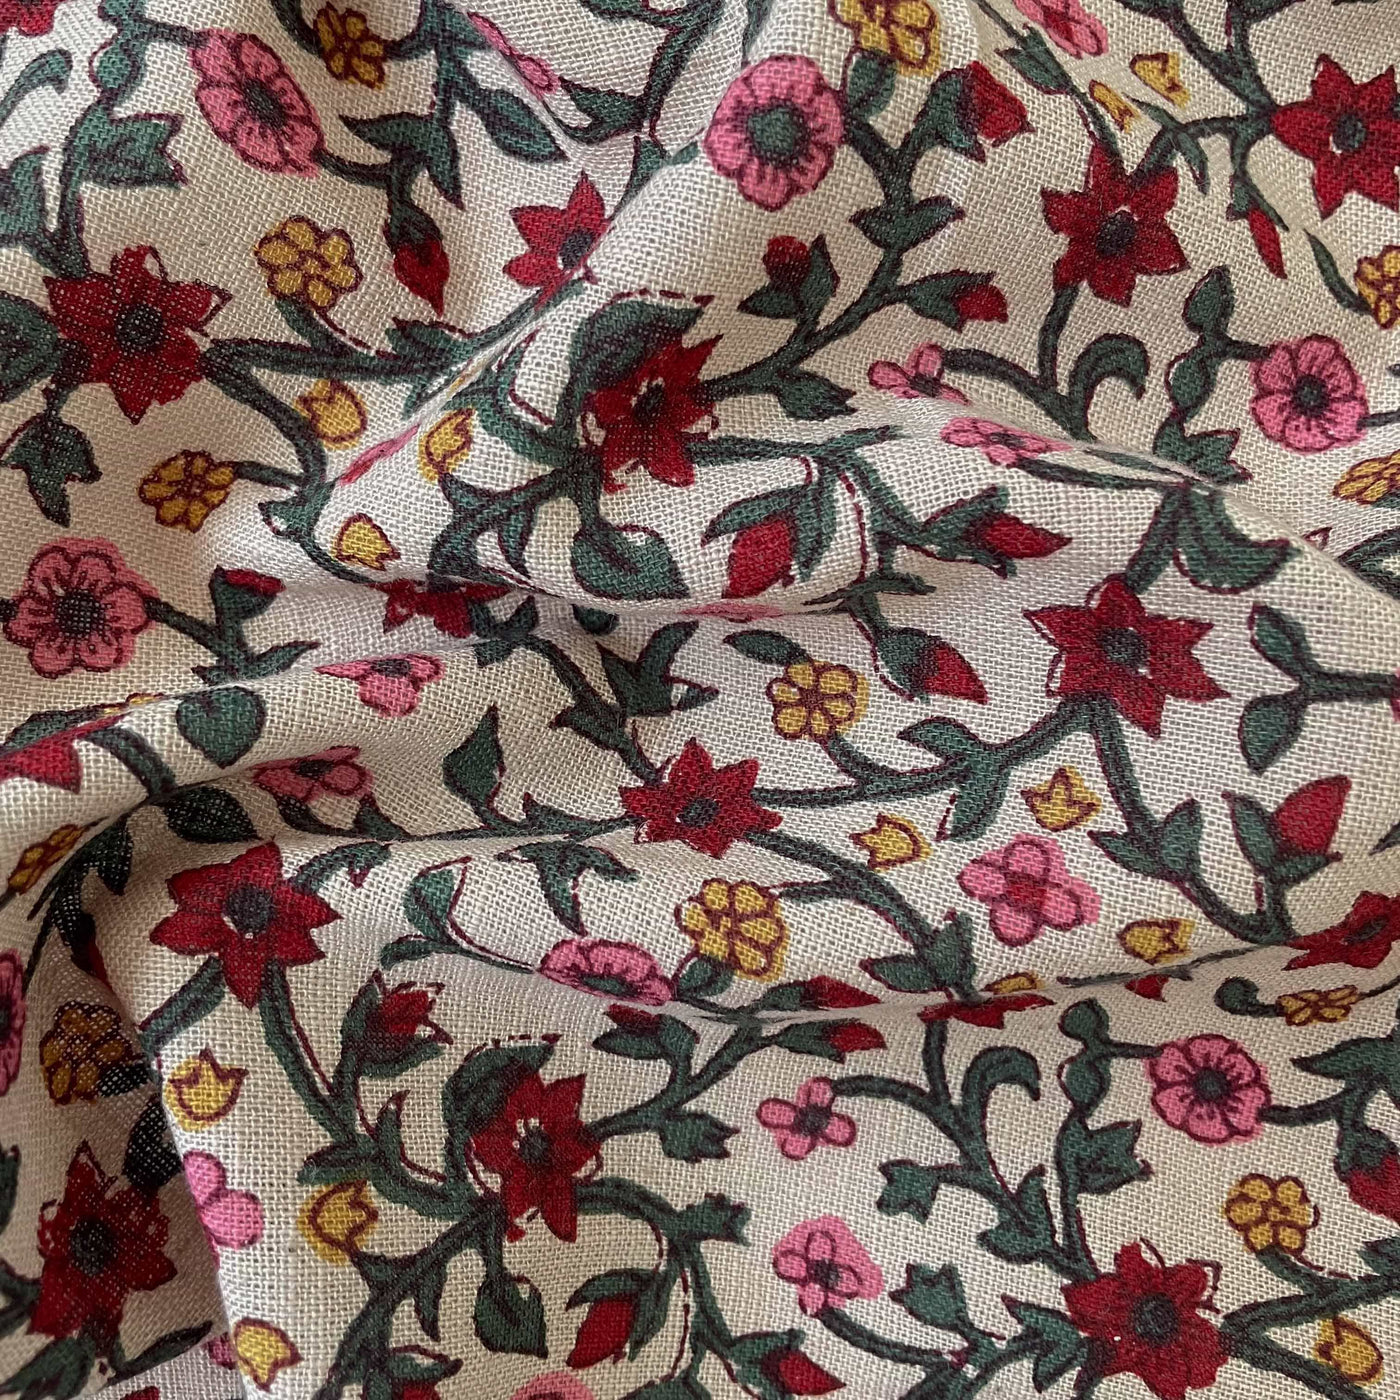 Fabric Pandit Fabric Beige & Maroon Mughal Floral Vines Hand Block Printed Pure Cotton Linen Fabric (Width 42 inches)